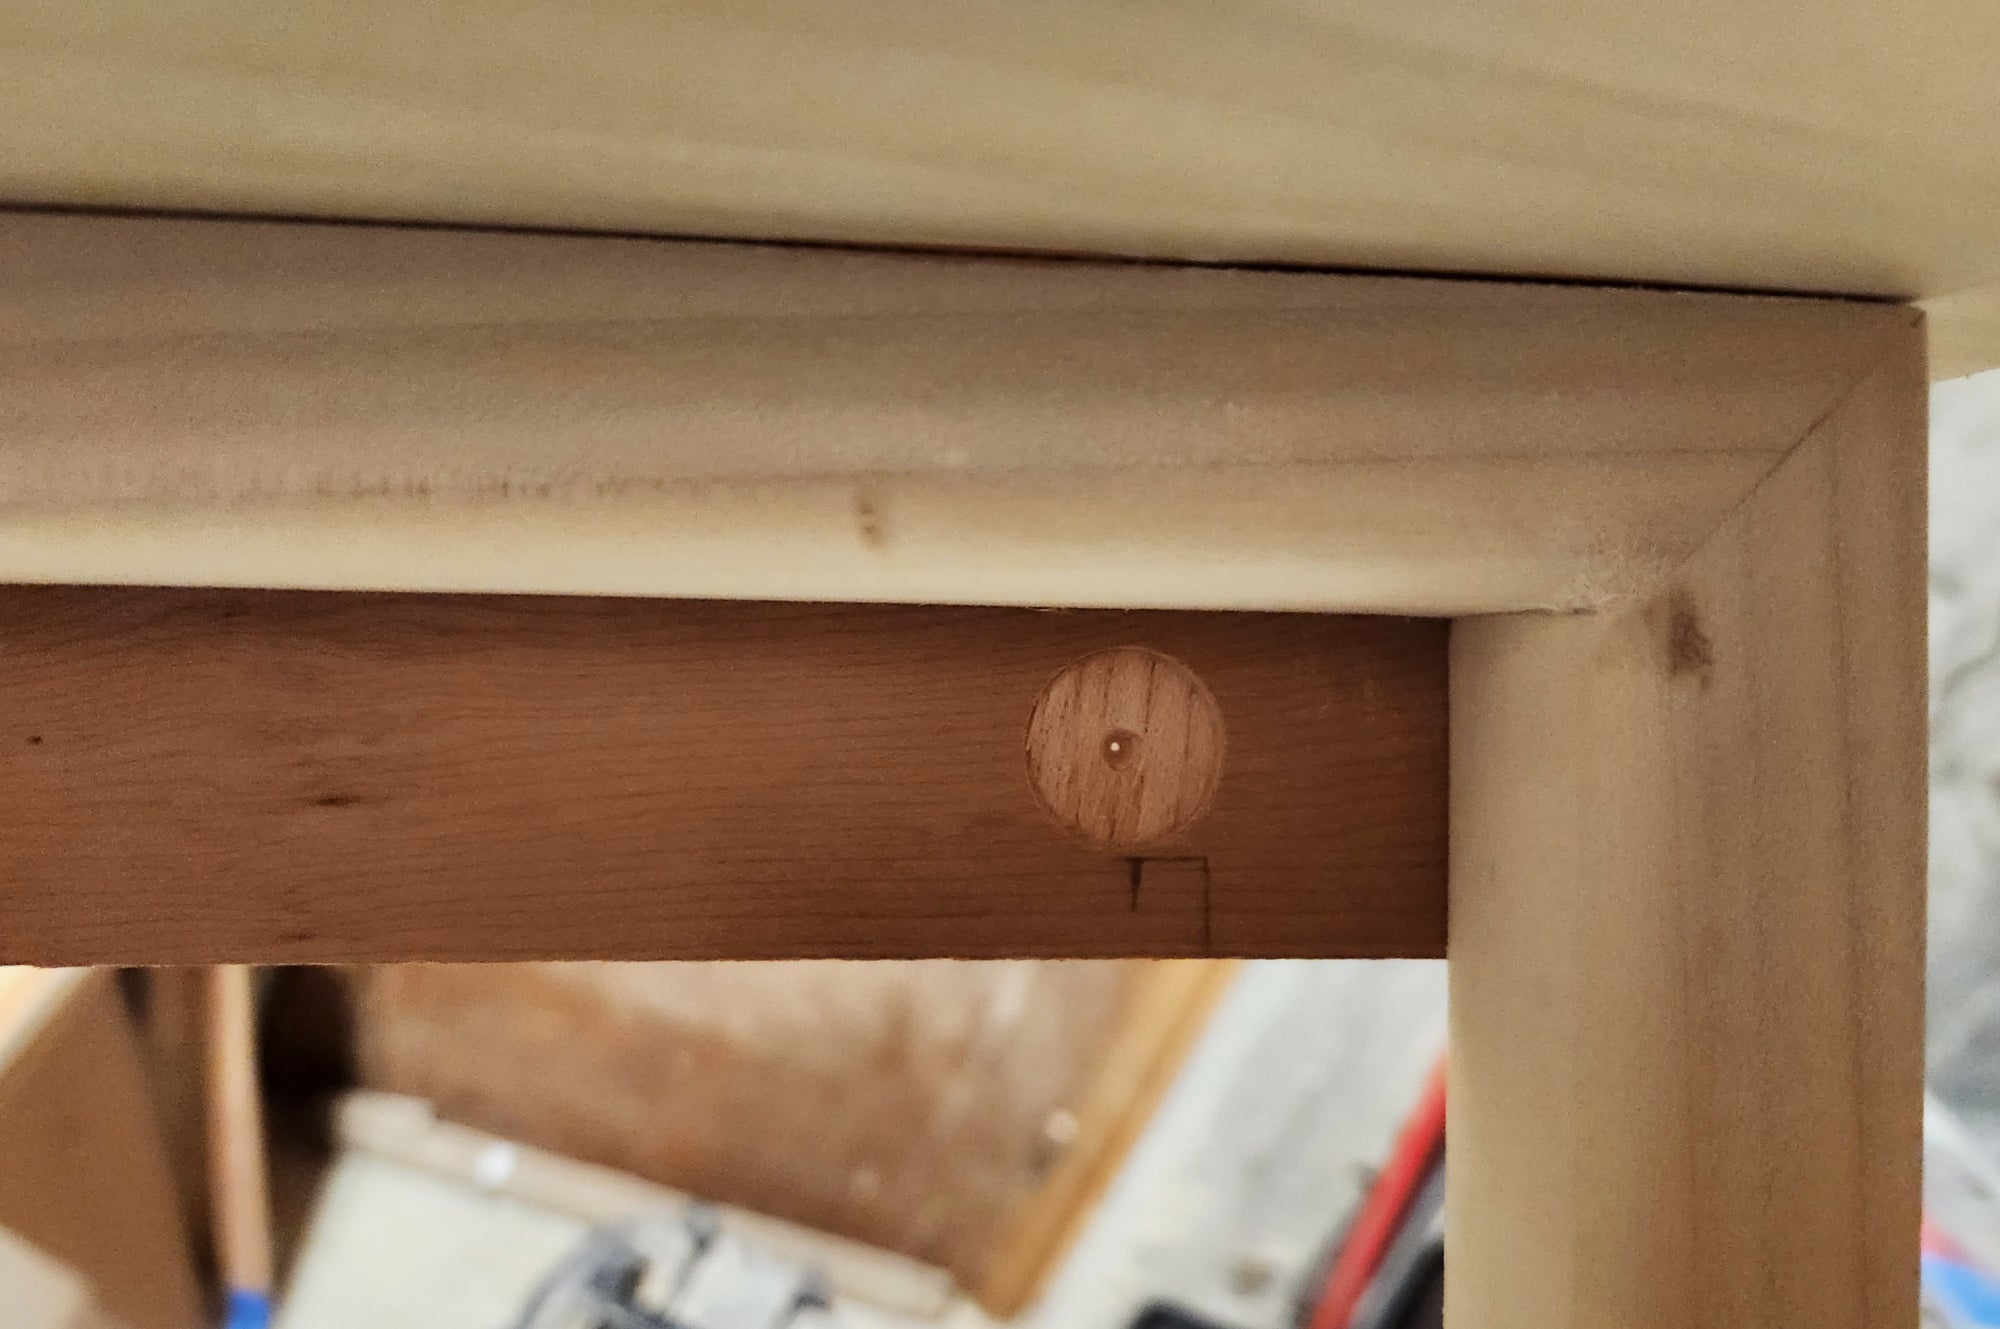 A shallow hole in a piece of wood on a DIY laundry drying rack, where a magnet will eventually go to hold the folding inner frame closed.